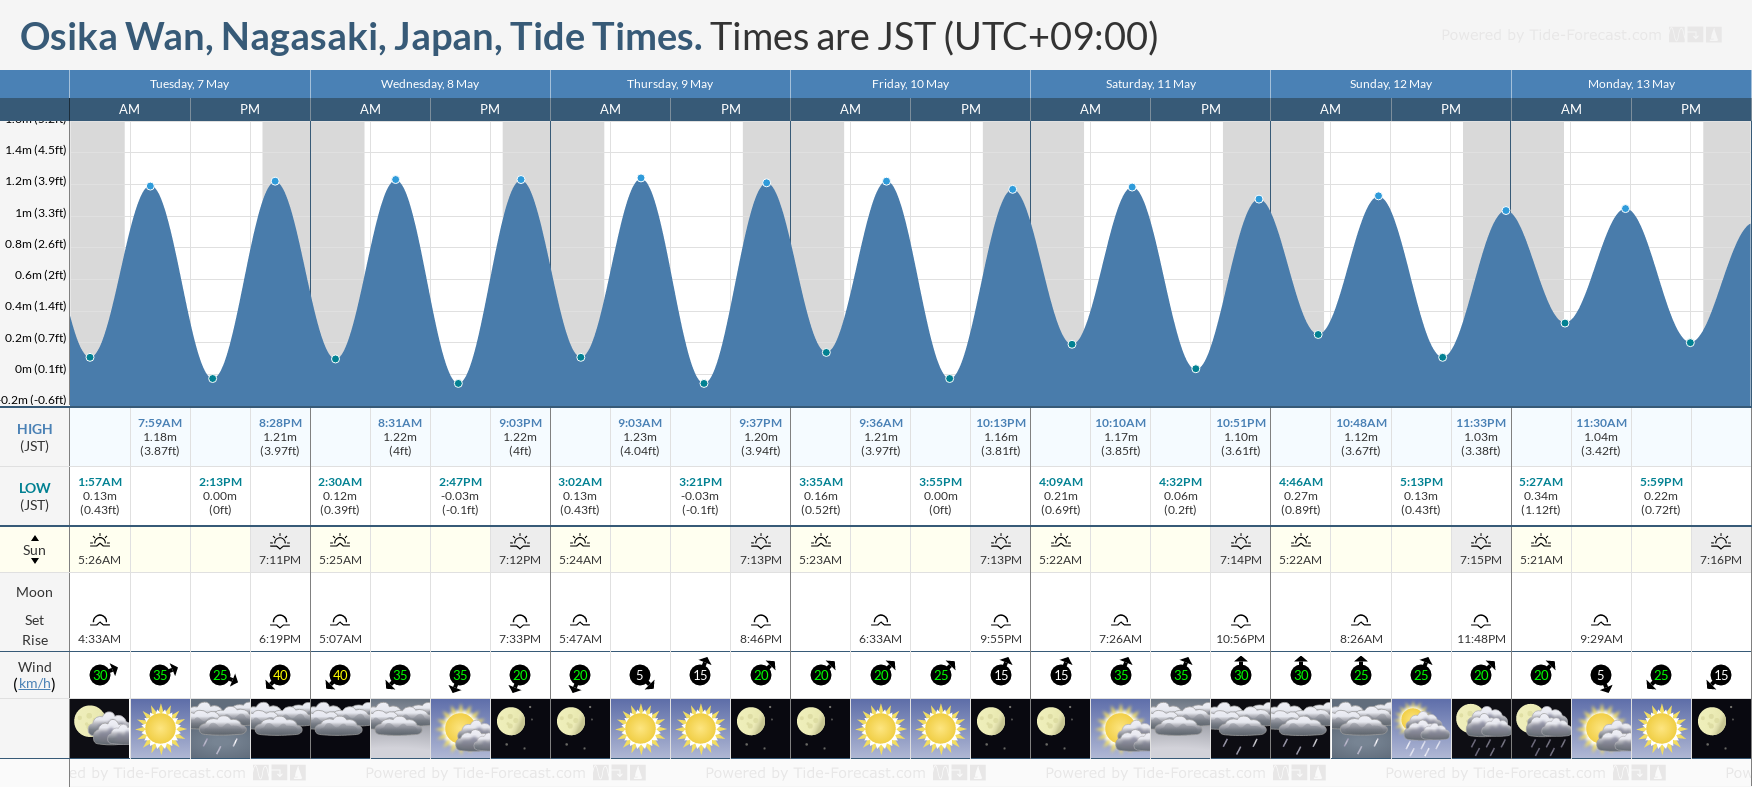 Osika Wan, Nagasaki, Japan Tide Chart including high and low tide tide times for the next 7 days